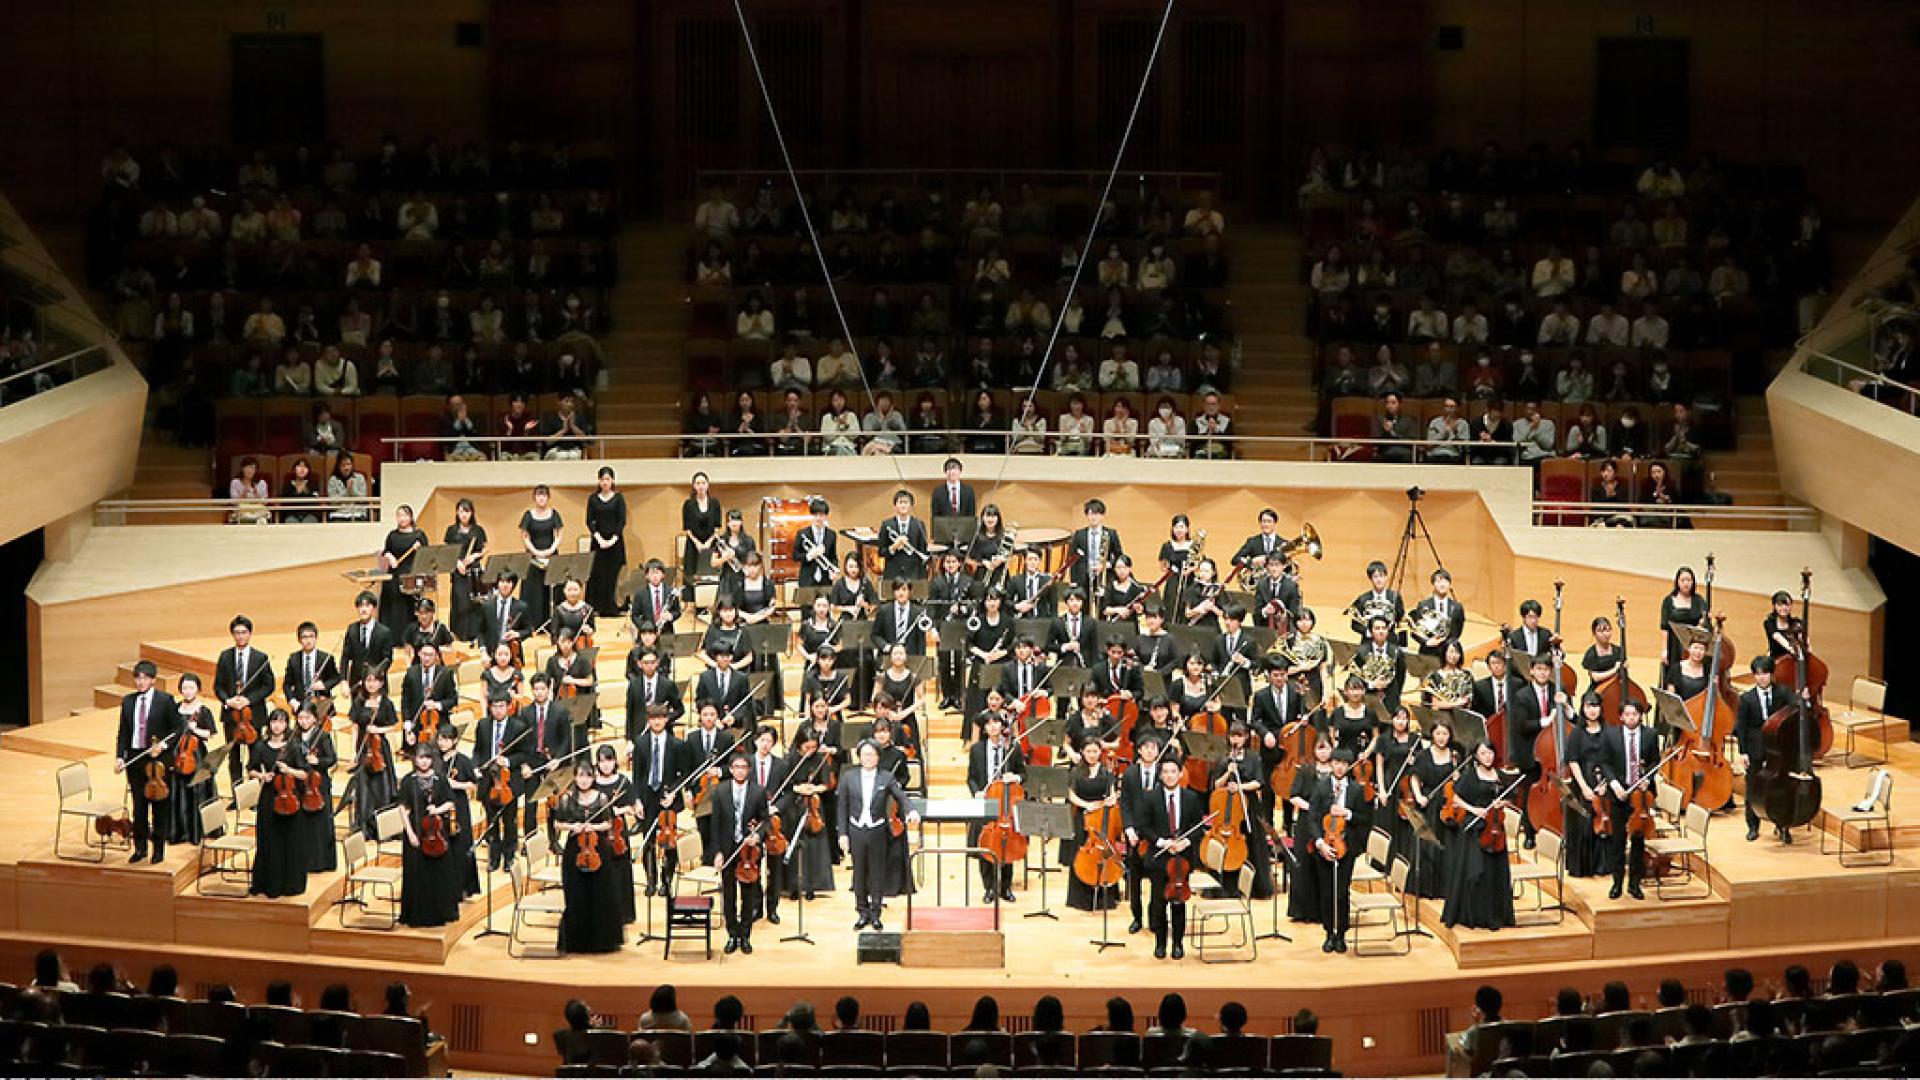 The Waseda Symphony Orchestra Tokyo is depicted on a stage. The musicians are dressed in black and look into the auditorium while standing.